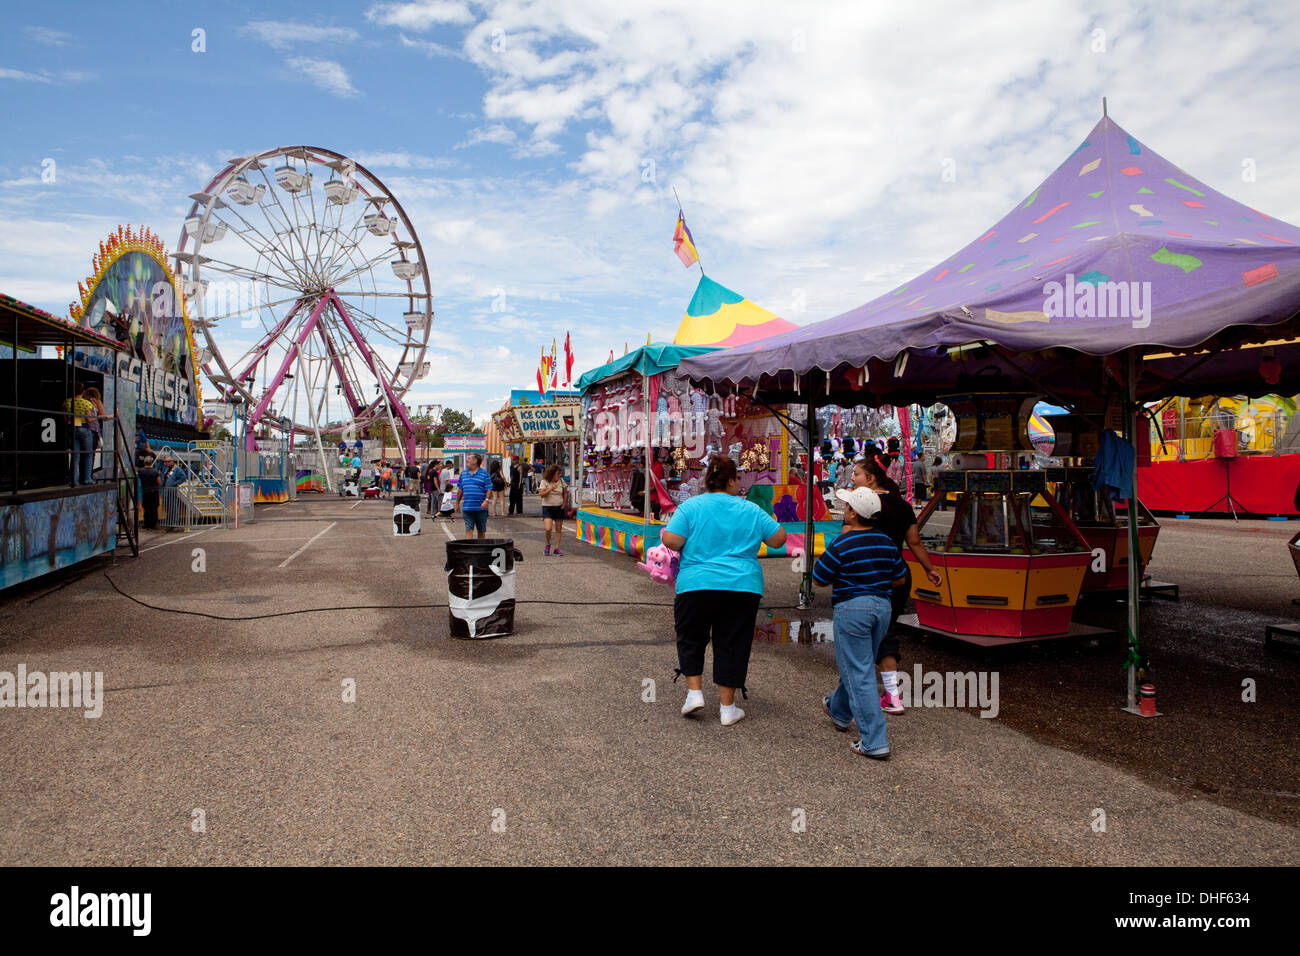 People walking through Midway at the New Mexico State Fair. Stock Photo